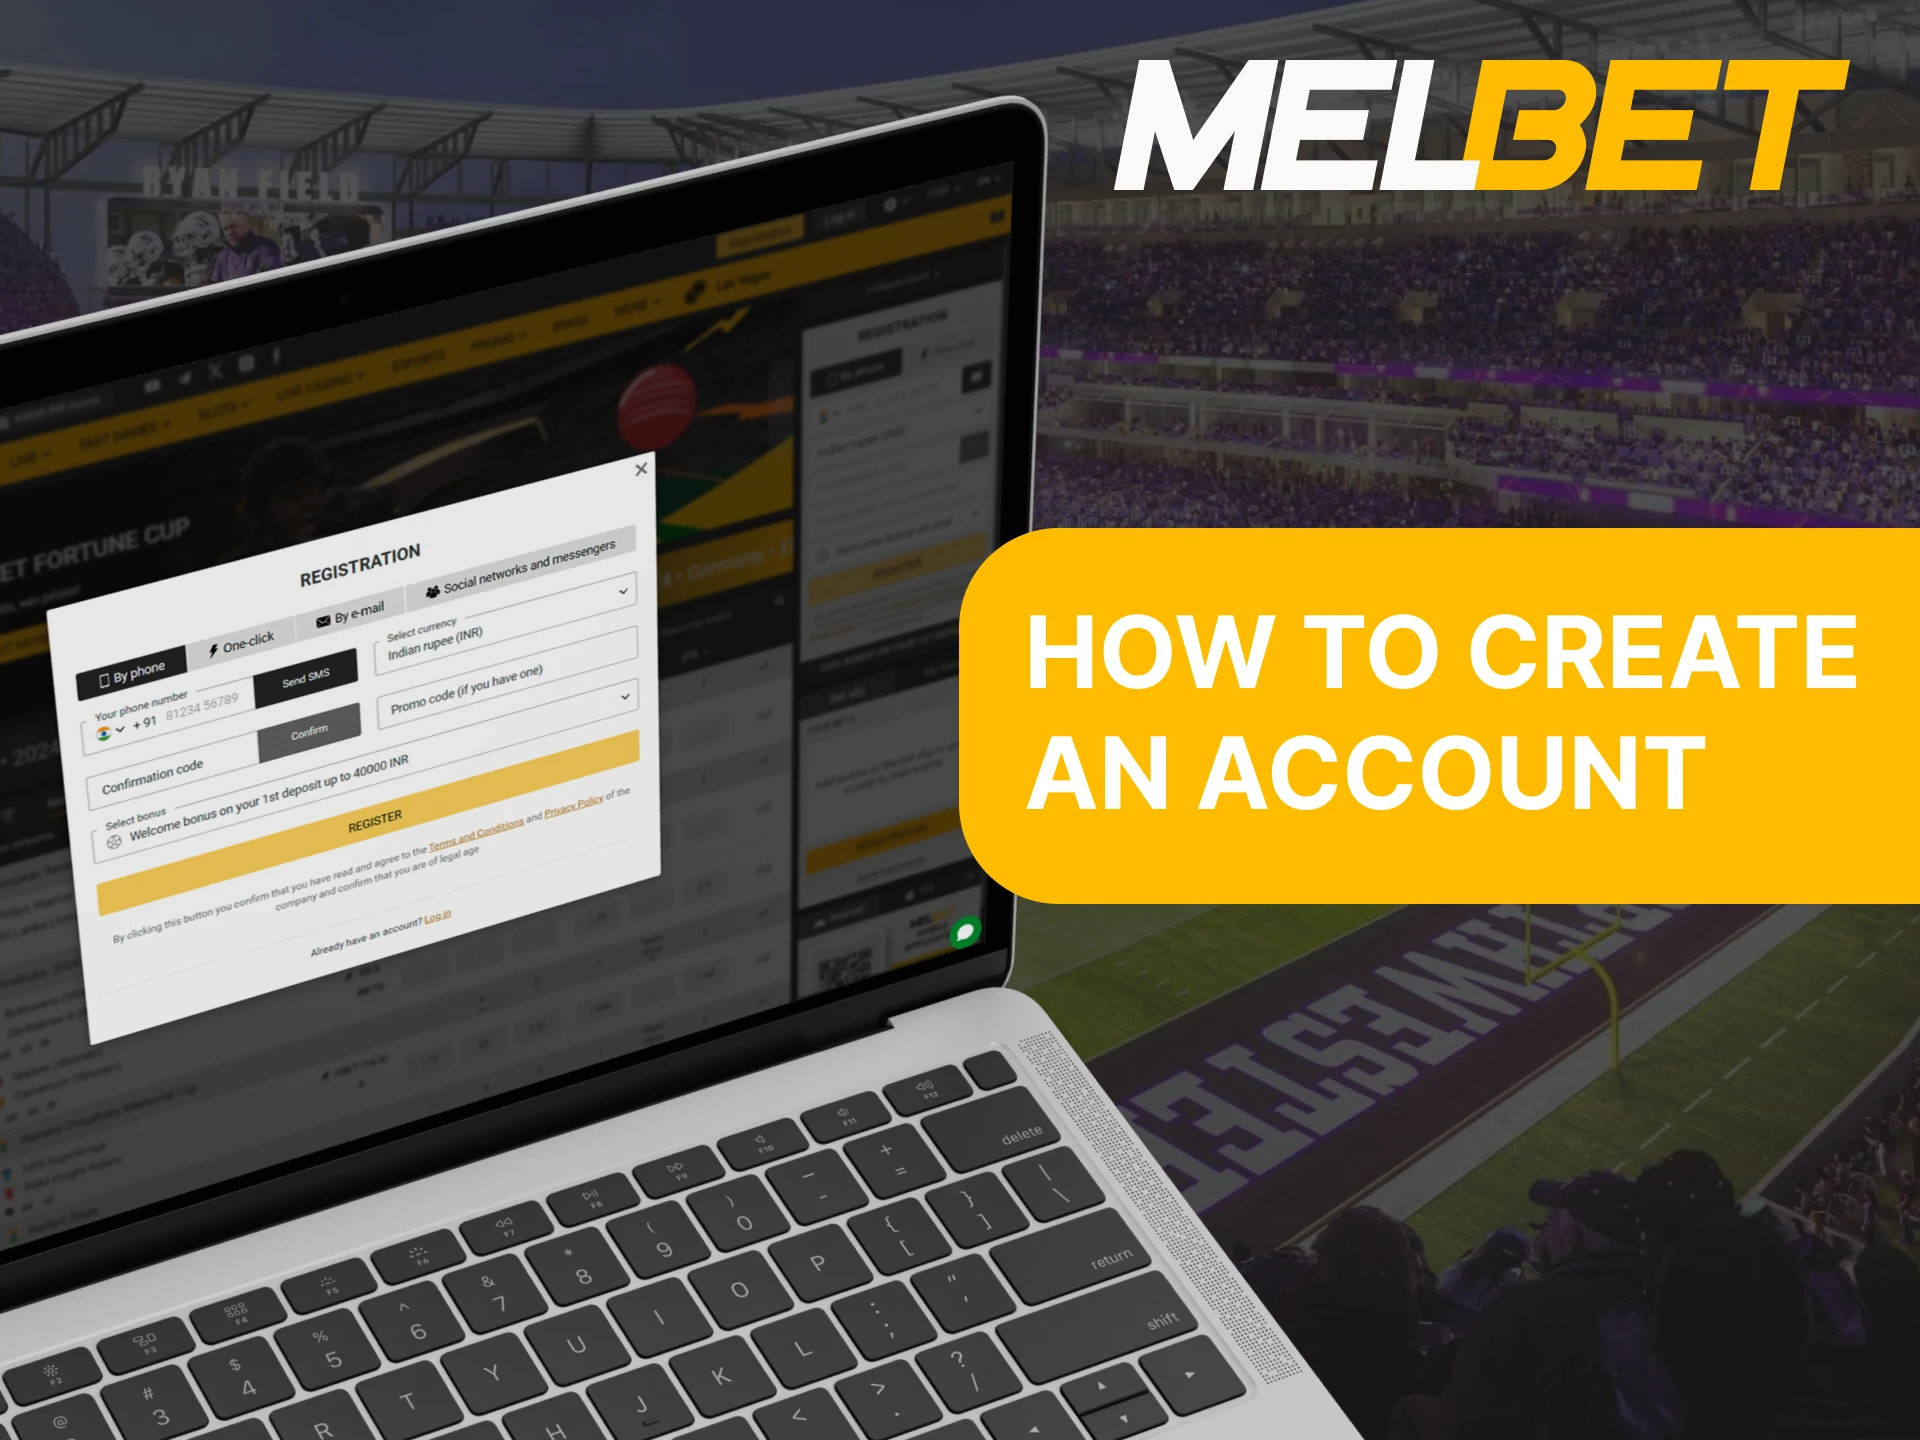 You don't need any knowledge to register an account with Melbet.